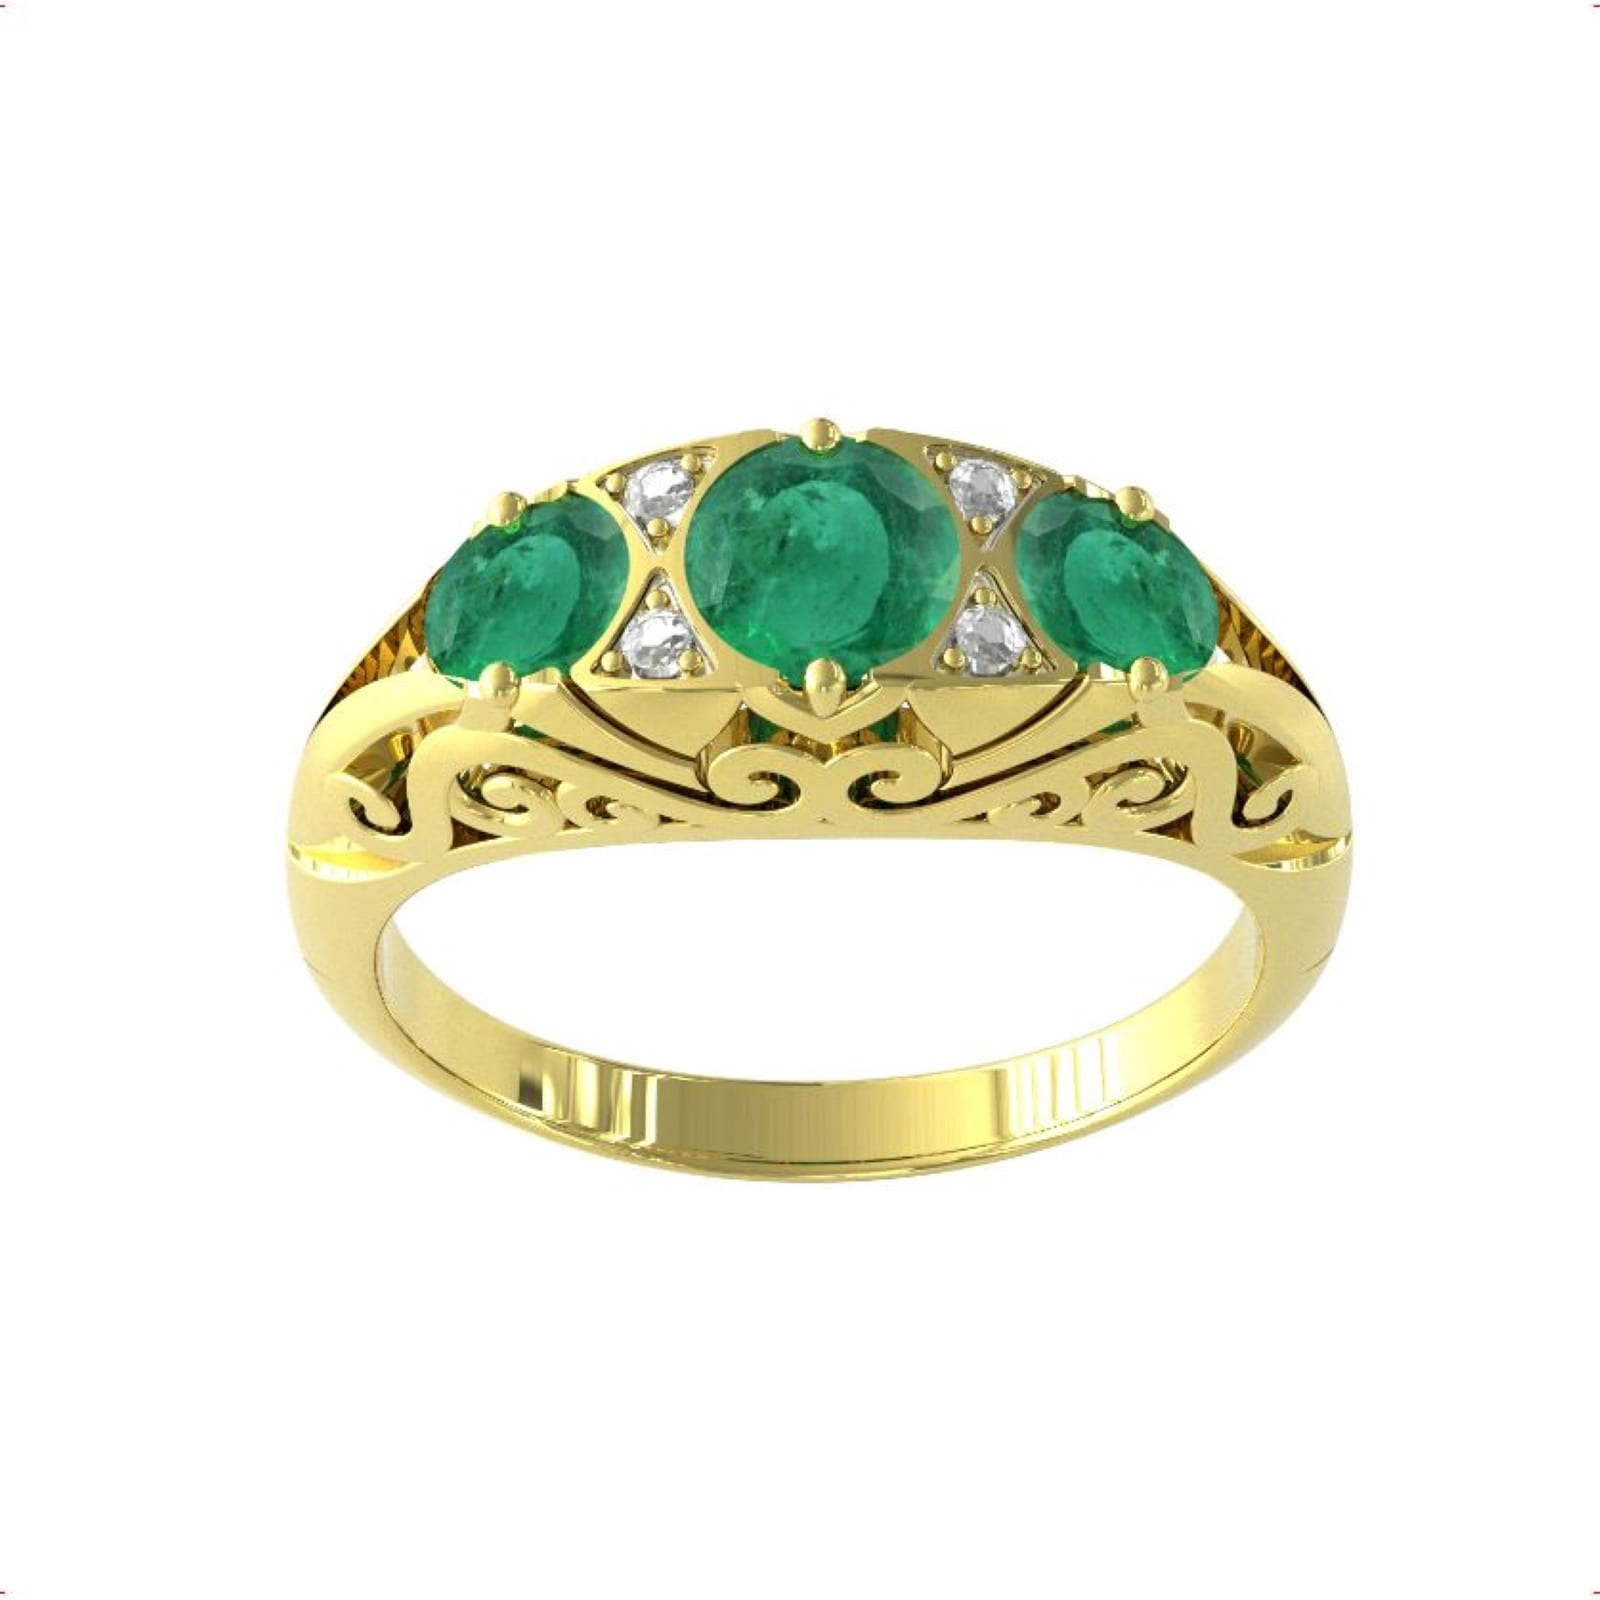 9ct Yellow Gold Victorian Style 3 Stone Emerald & Diamond Ring - Ring Size P.5